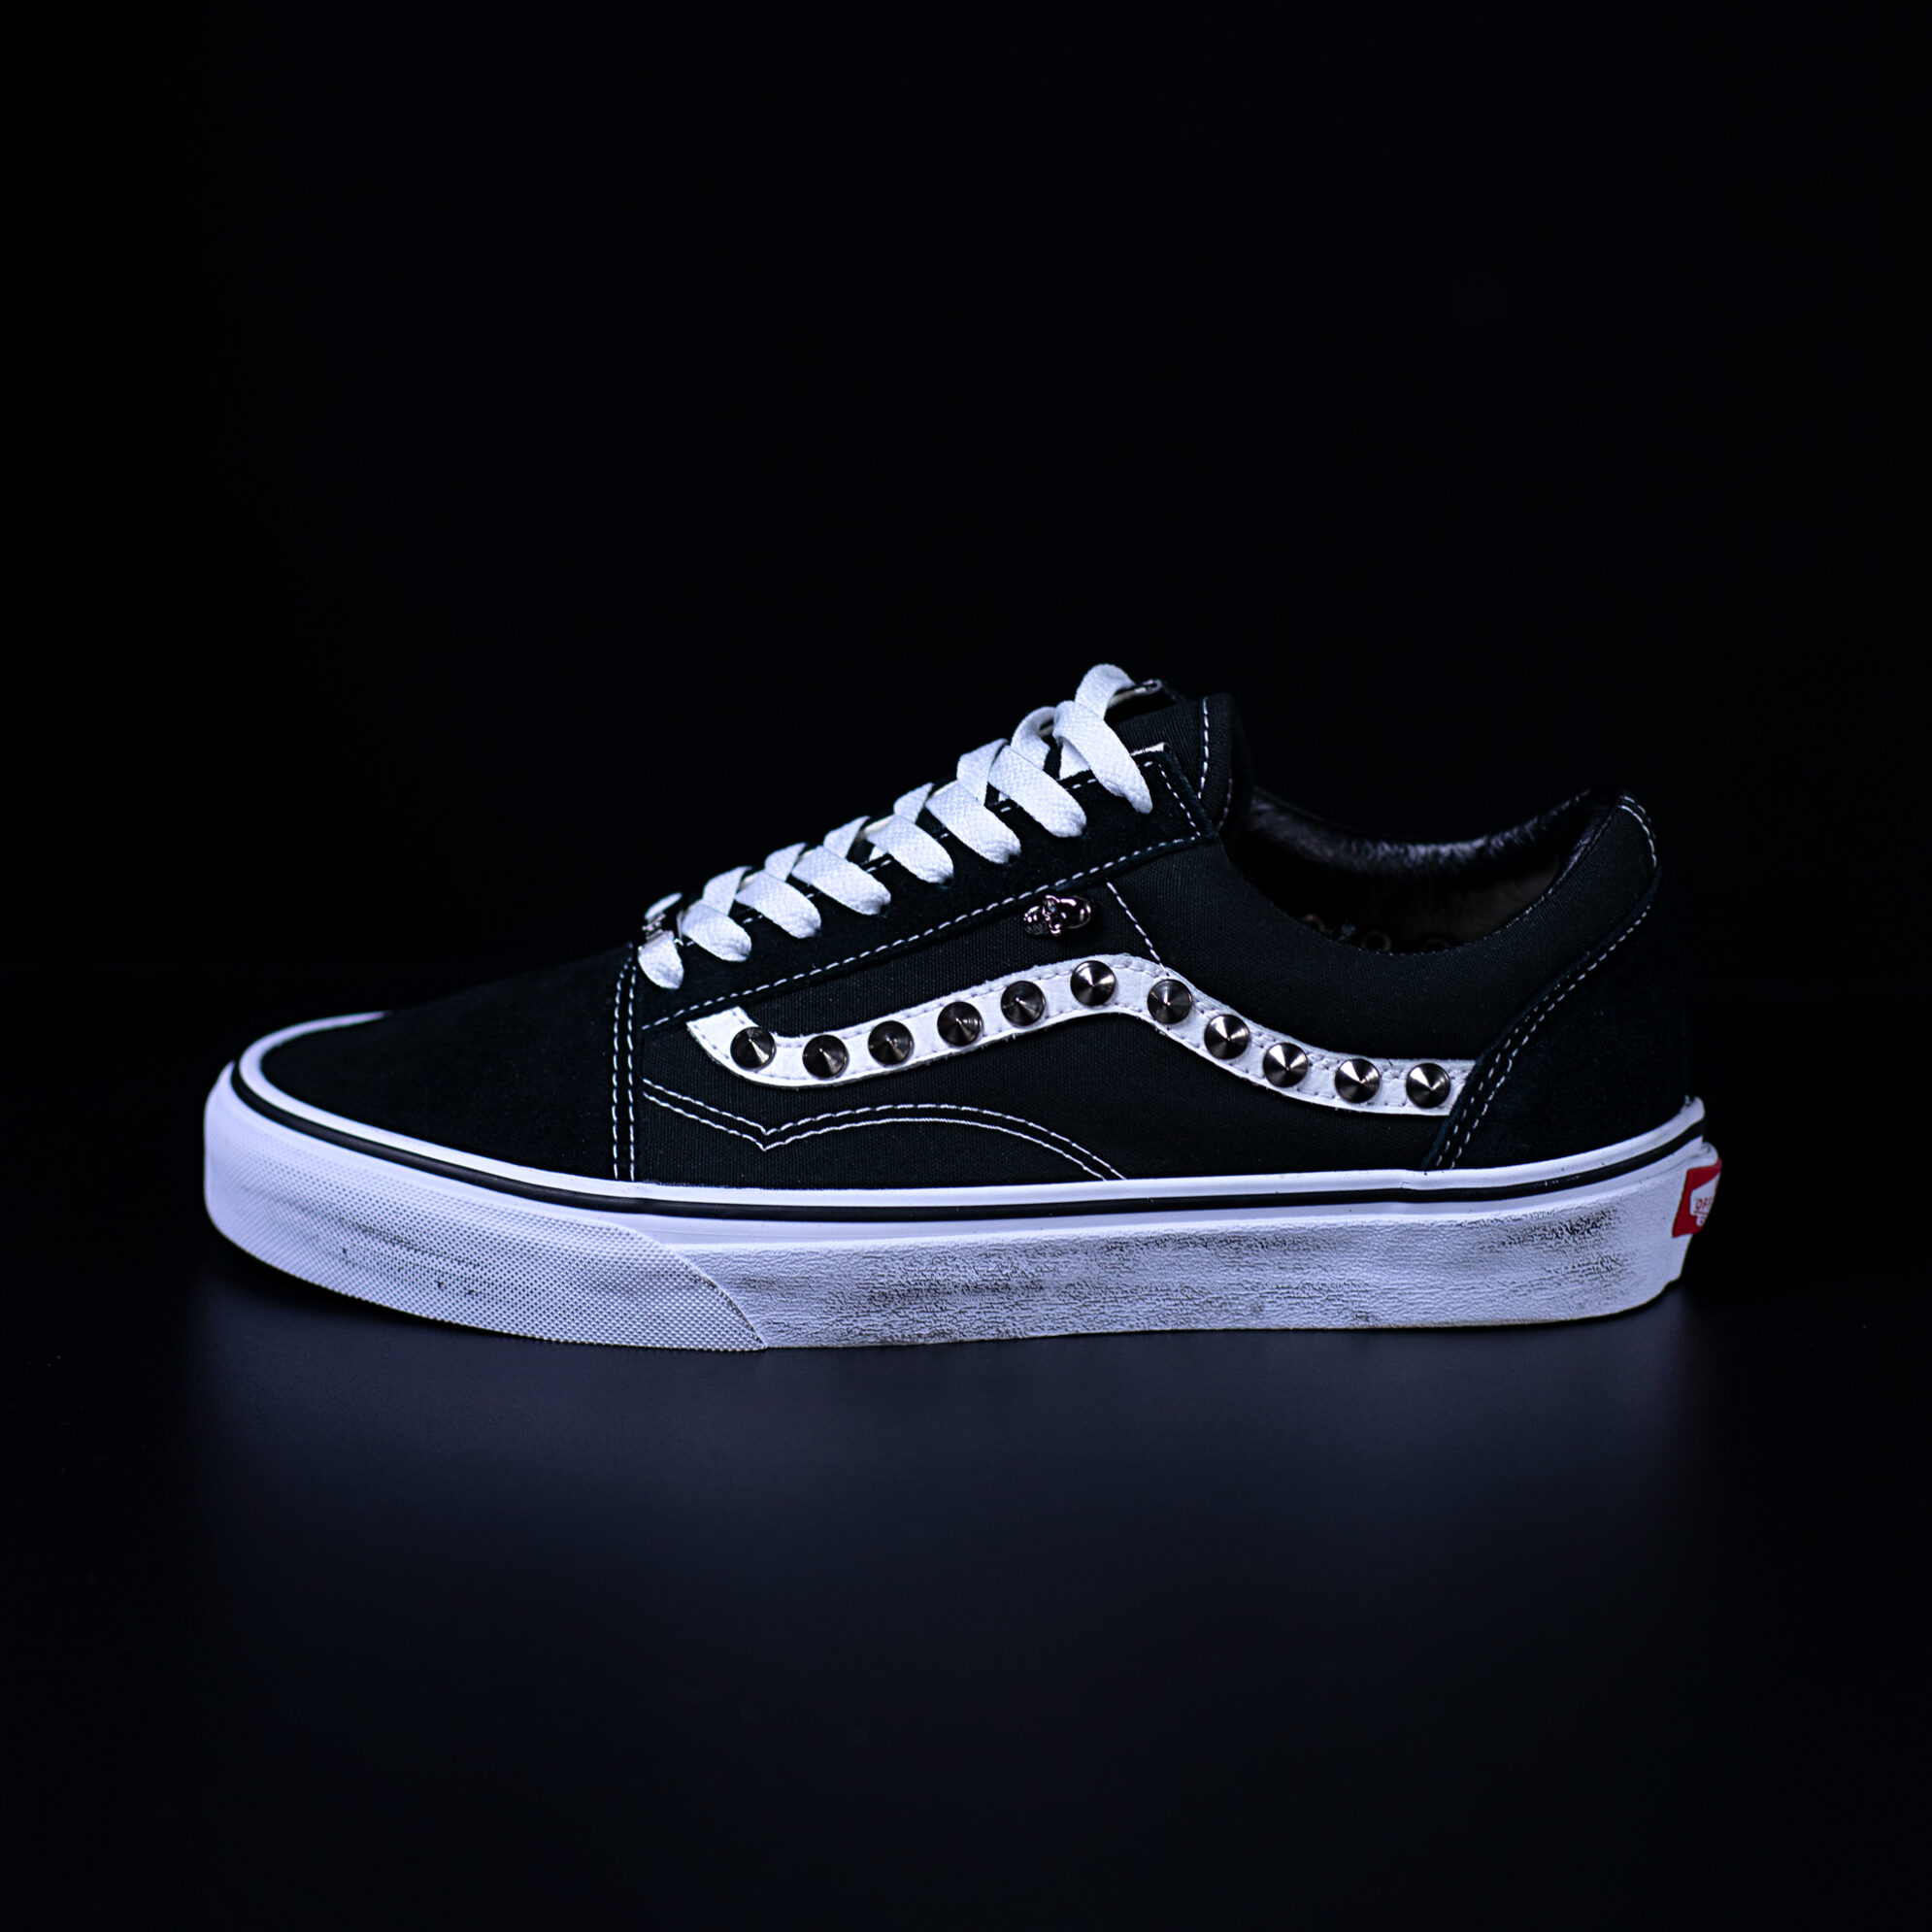 vans don't start now old skool sneakers personalizzate da dressed